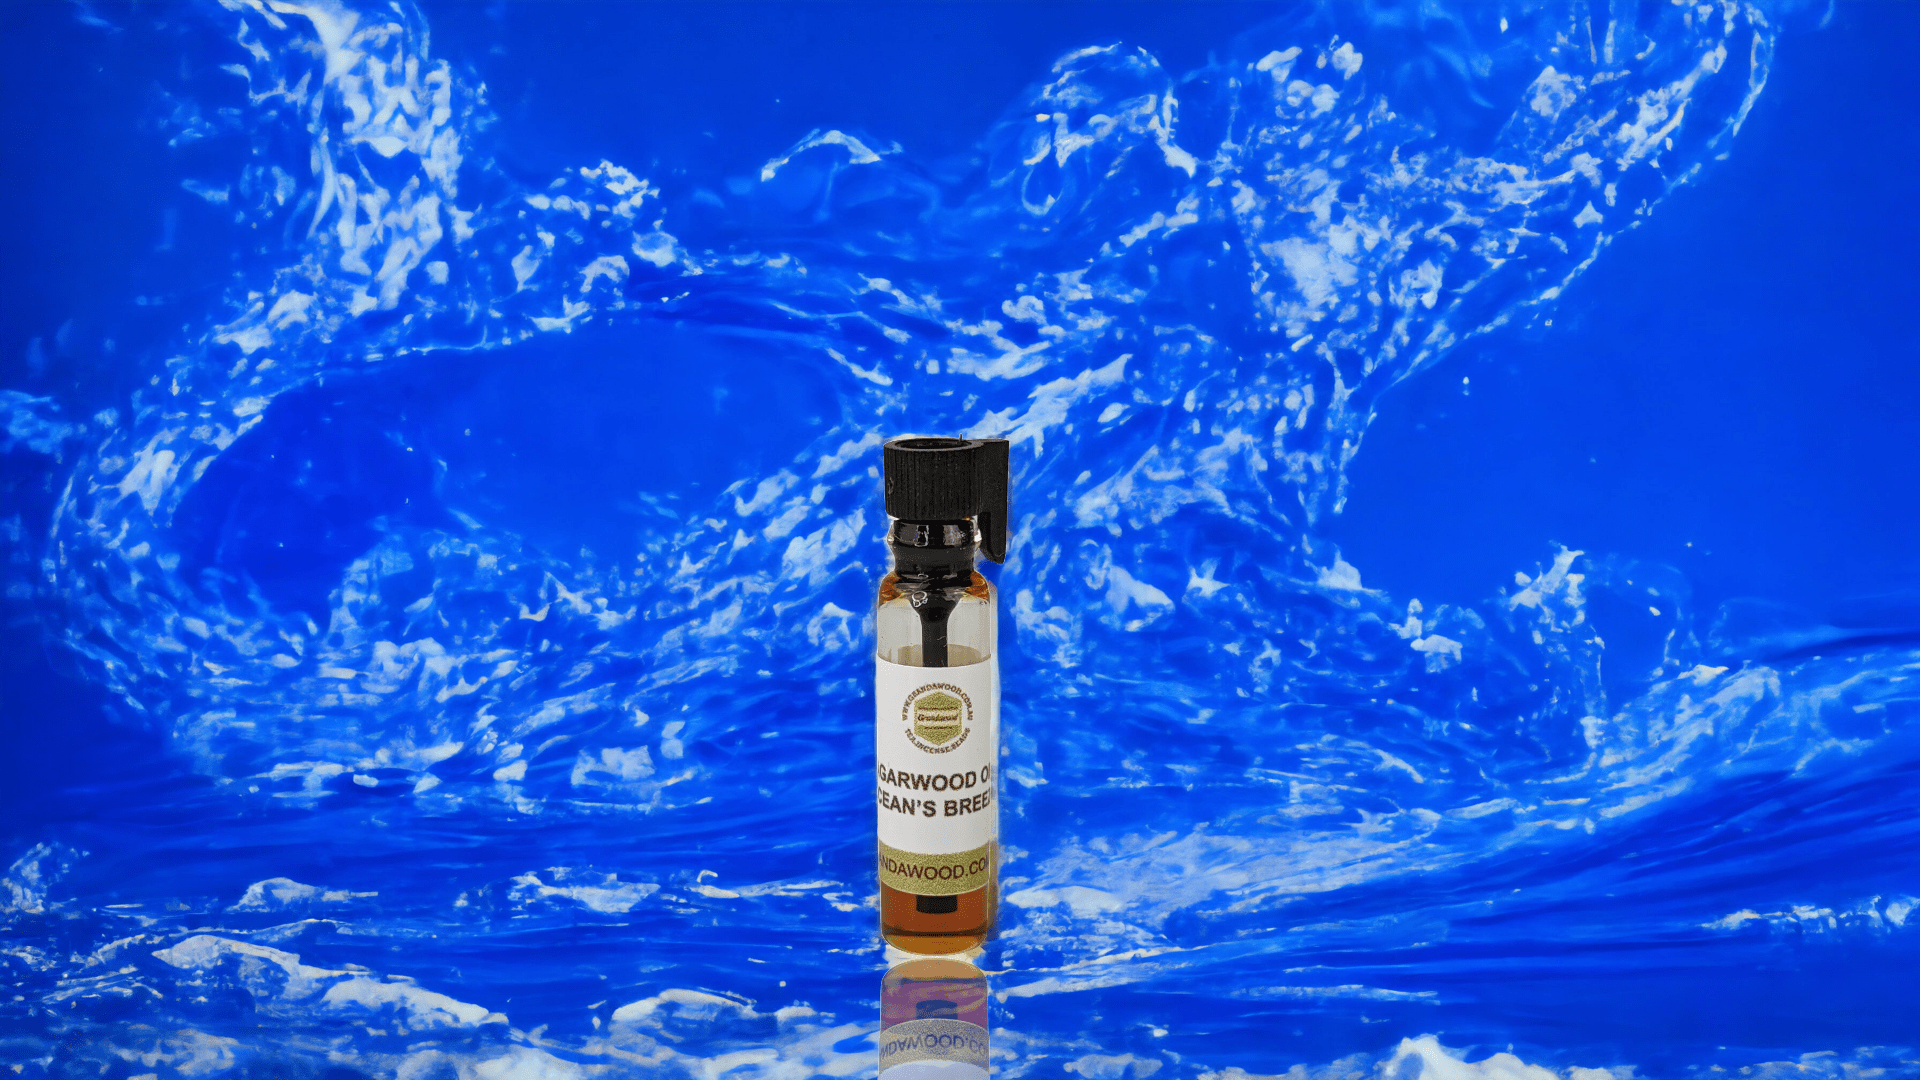 The Ocean's Breeze: The Scent of the Ocean 100% pure Wild Agarwood (Oud) Oil - 0.5ml